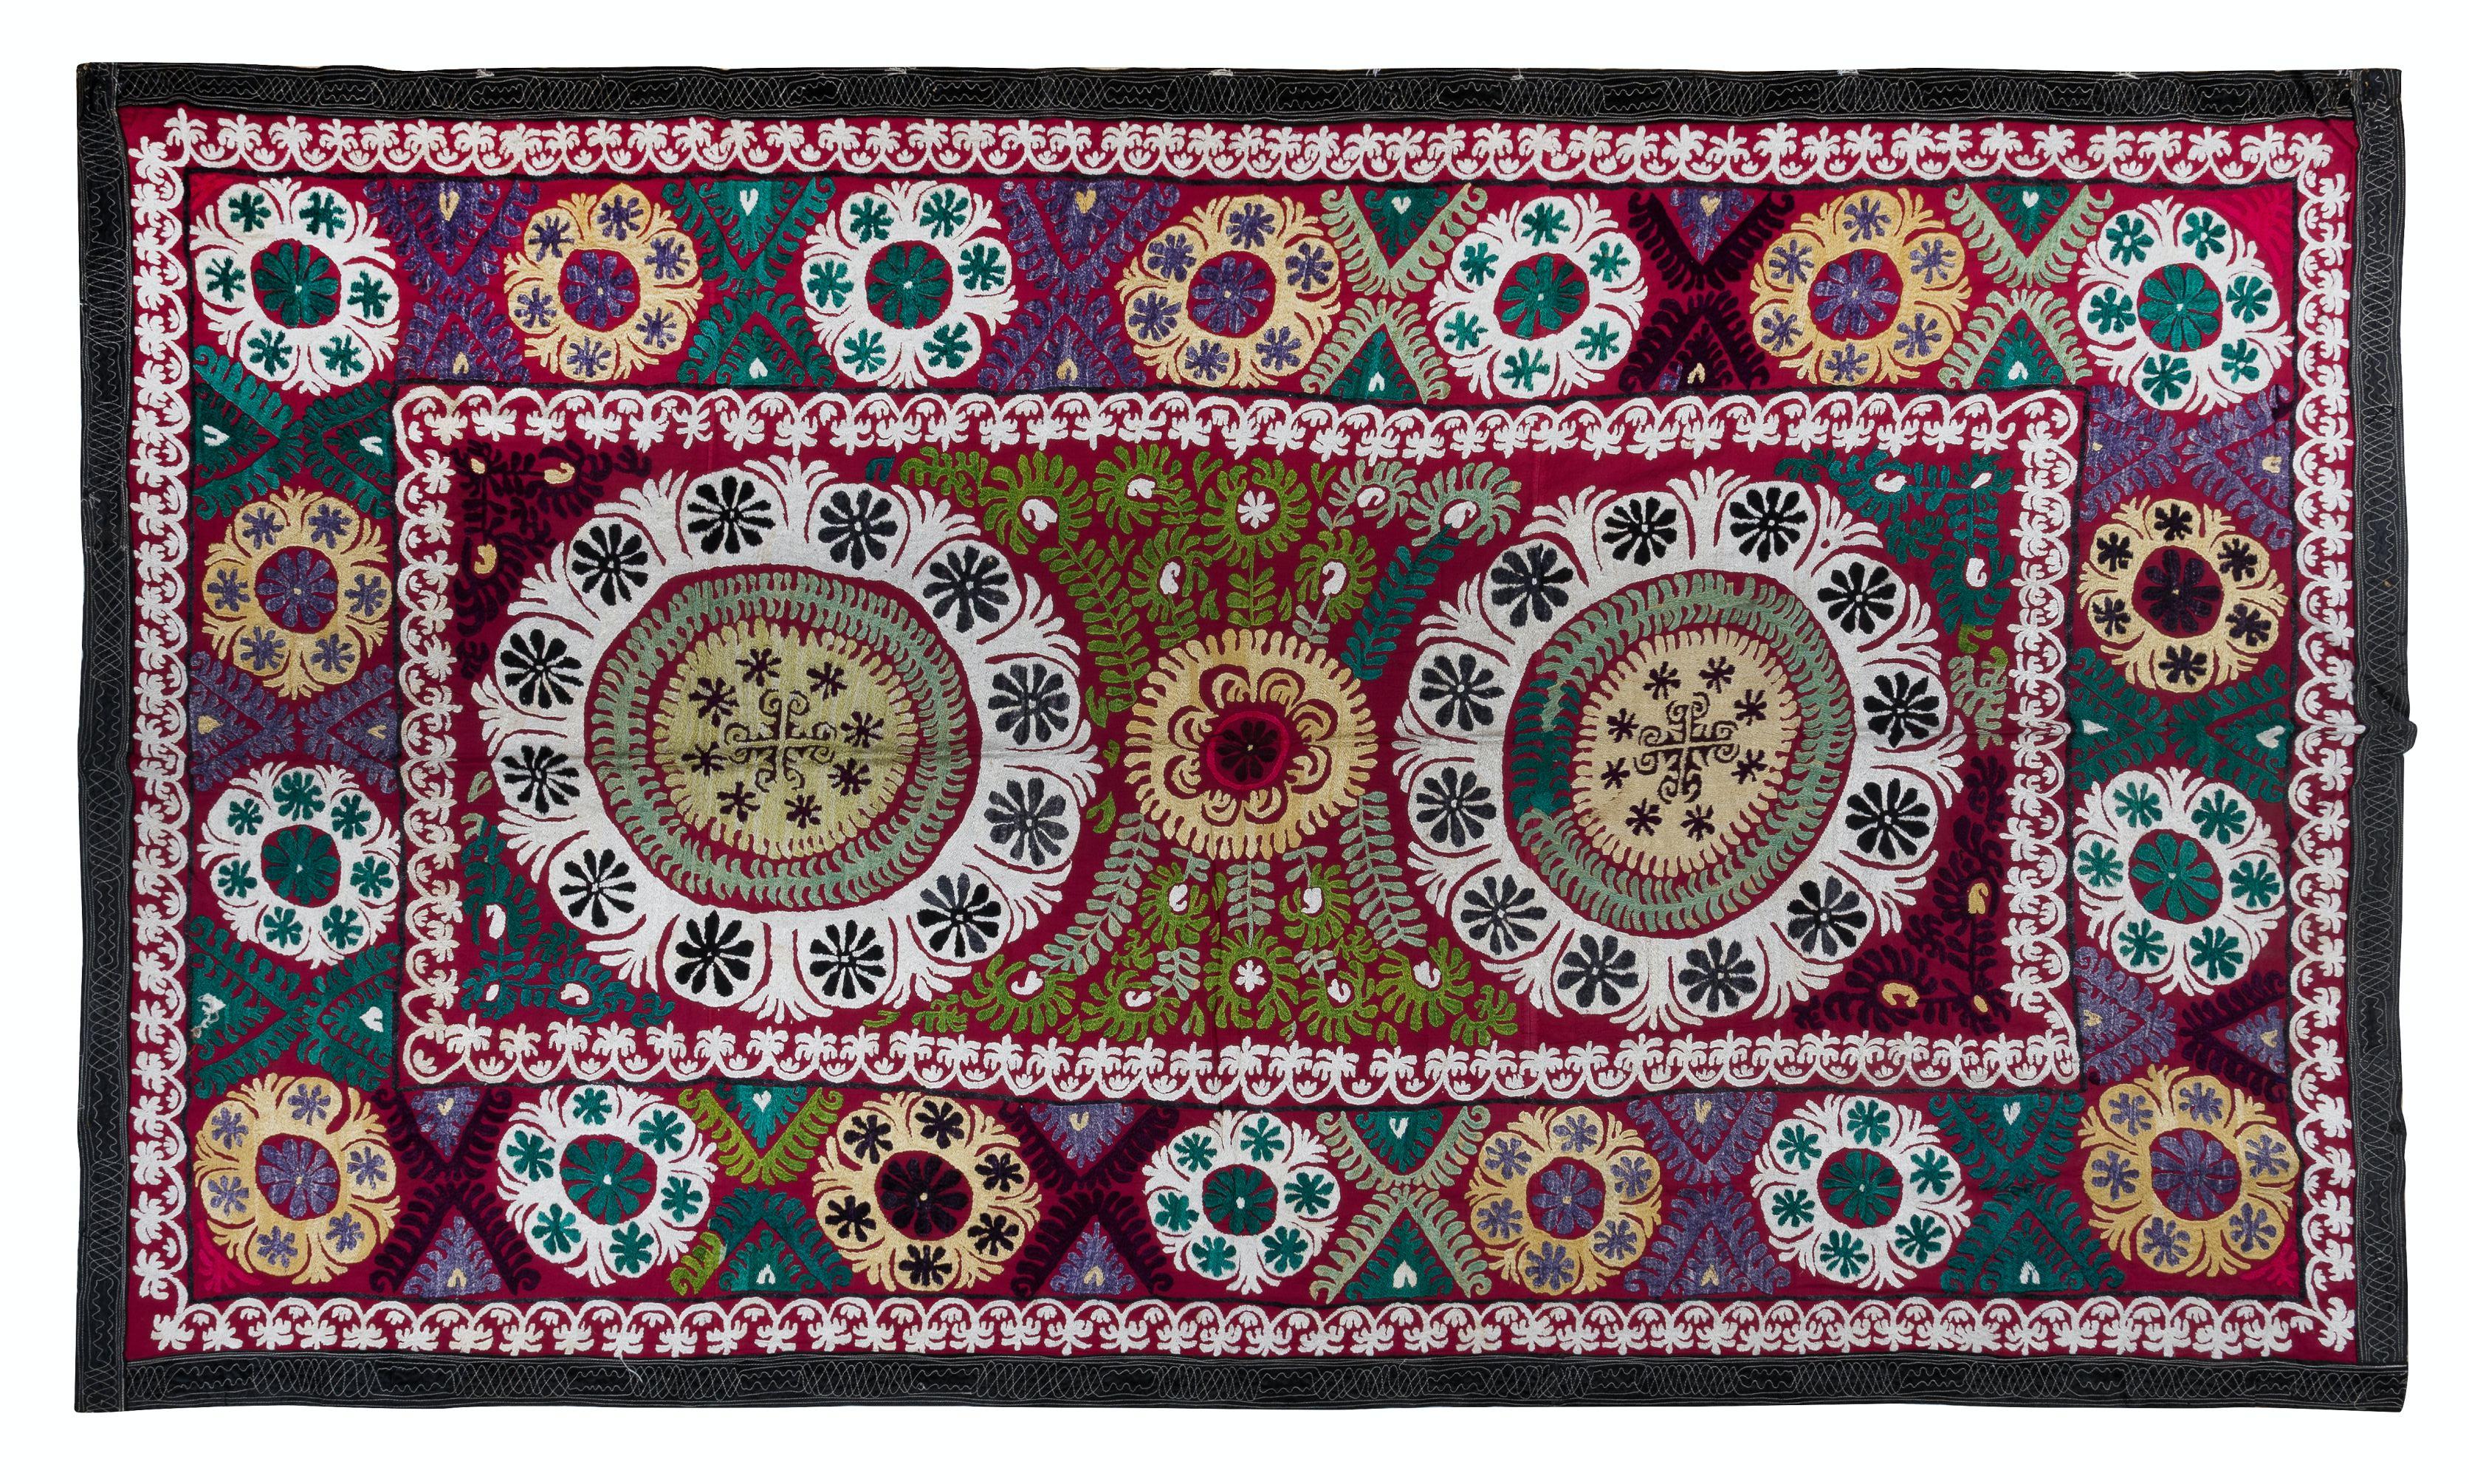 20th Century 5x8.7 ft Silk Hand Embroidered Wall Hanging, Vintage Colorful Suzani Bed Cover For Sale